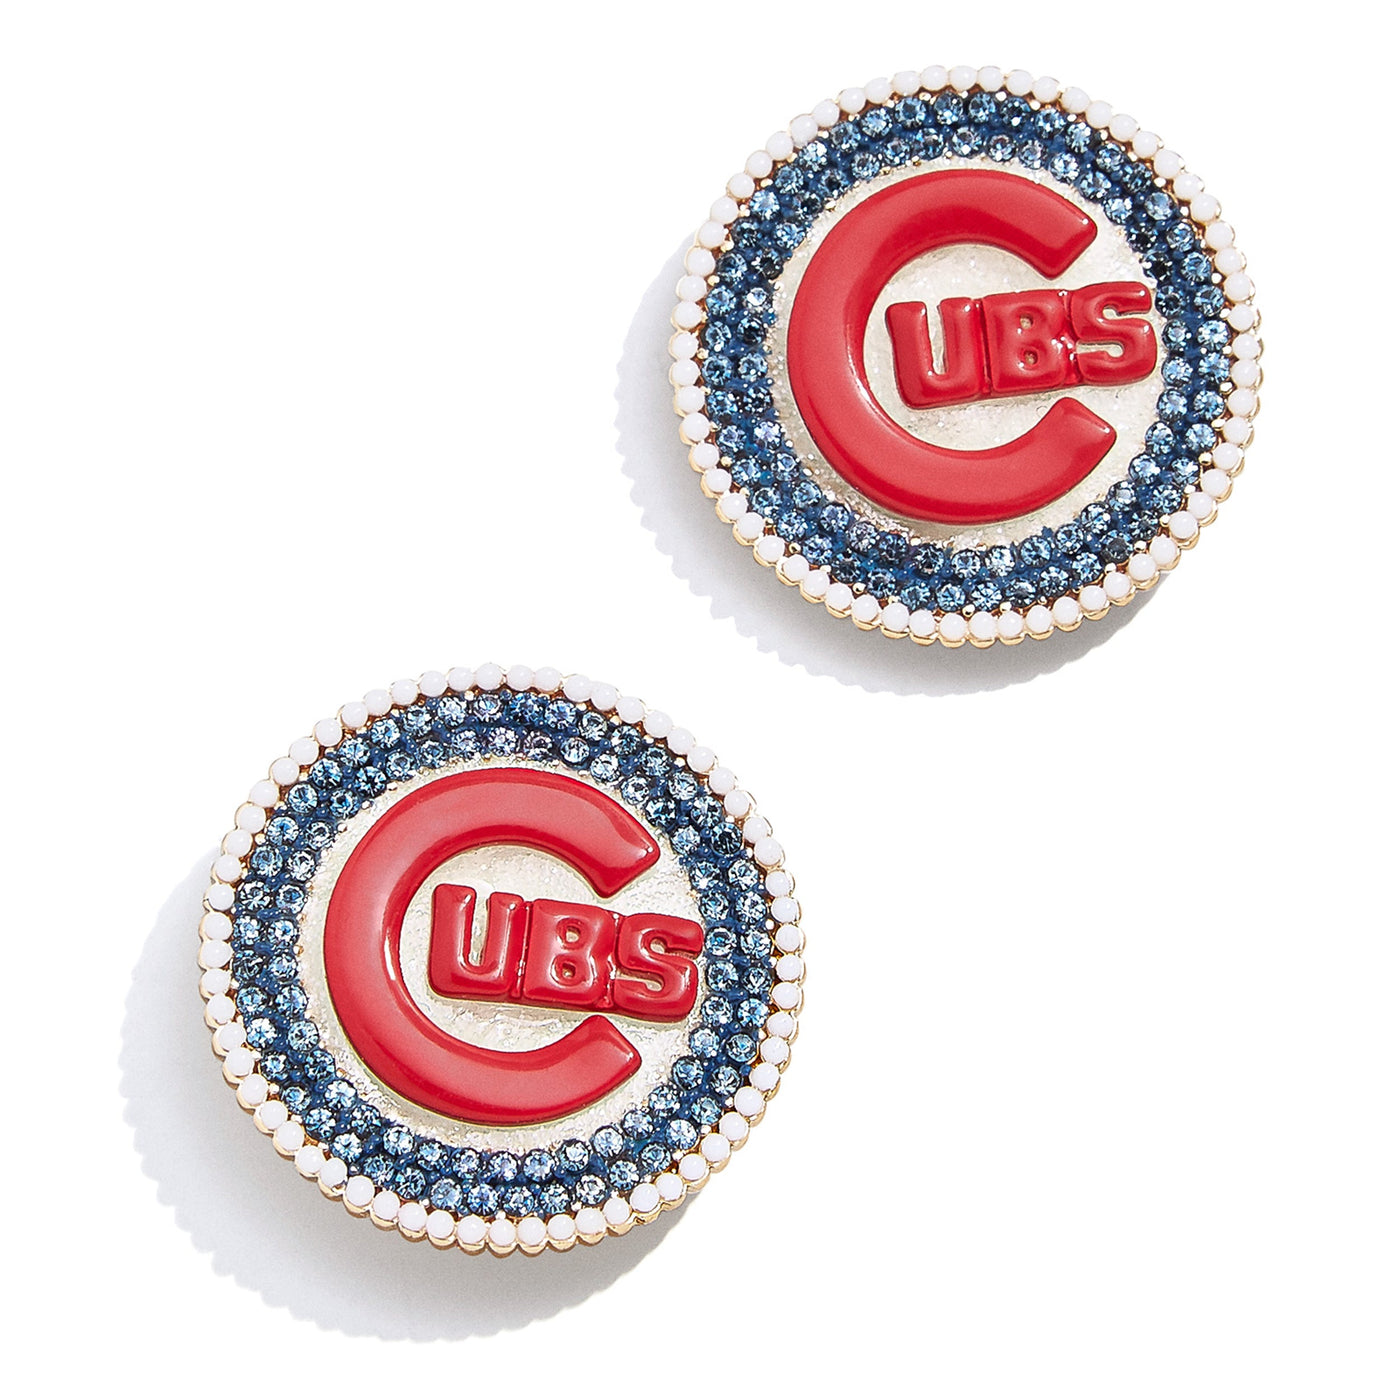 CHICAGO CUBS BAUBLE BAR BULLSEYE BLUE AND RED STUD EARRINGS